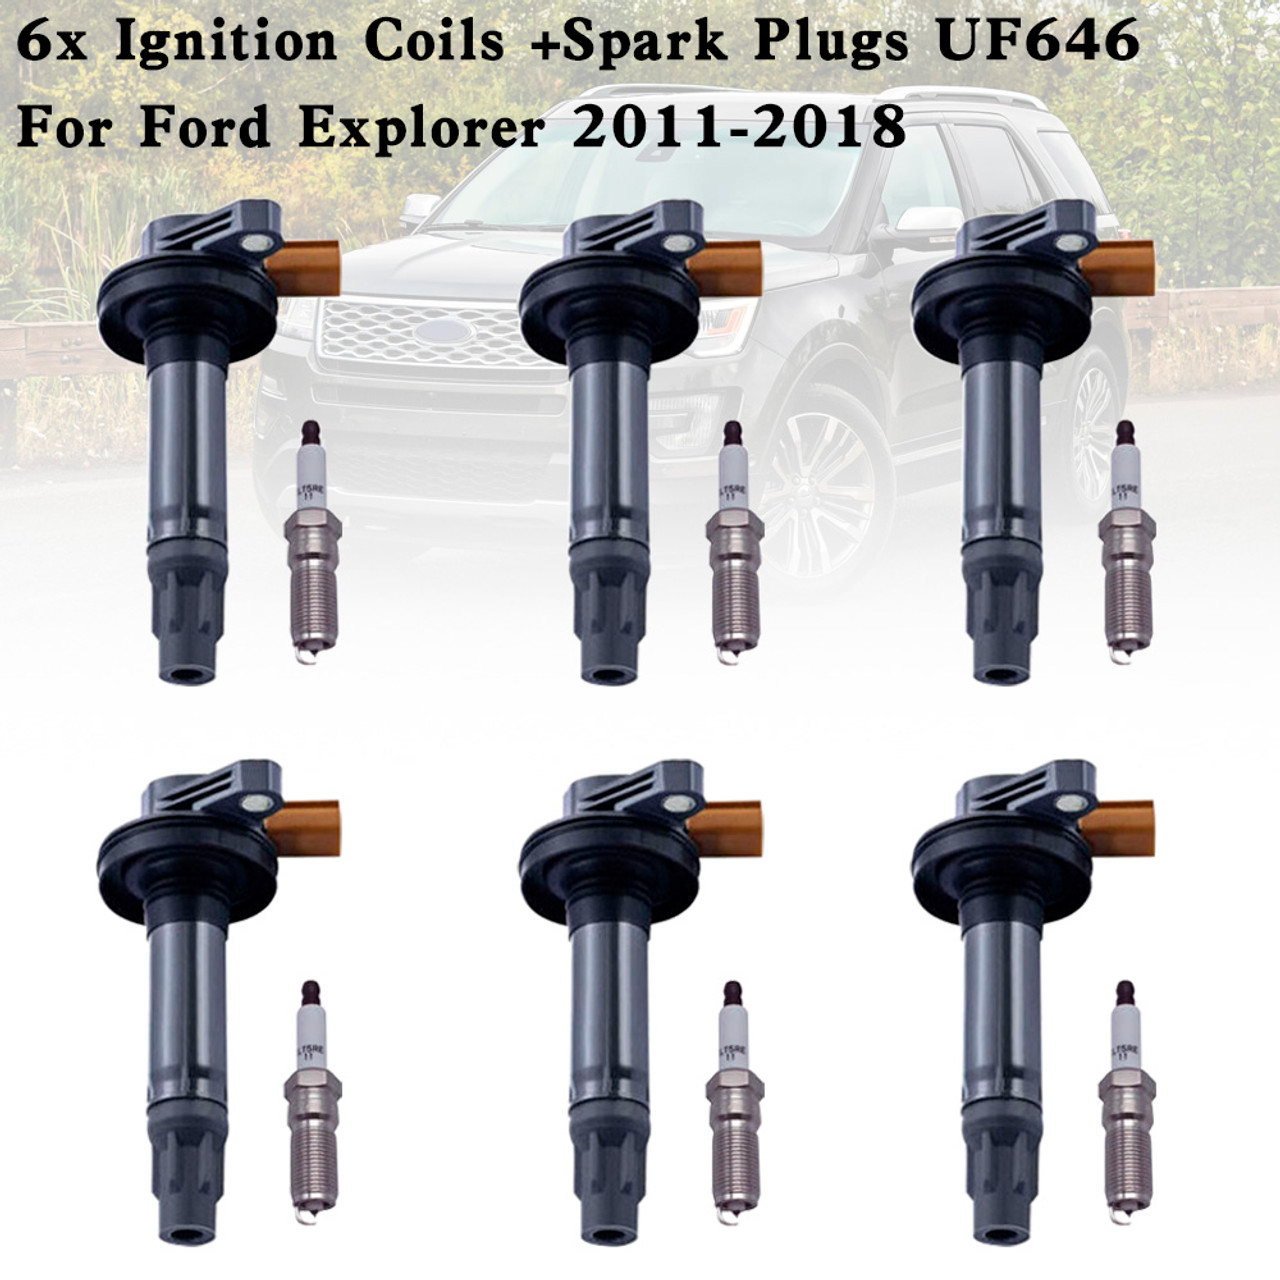 6x Ignition Coils +Spark Plugs UF646 For Ford Explorer 2011-2018